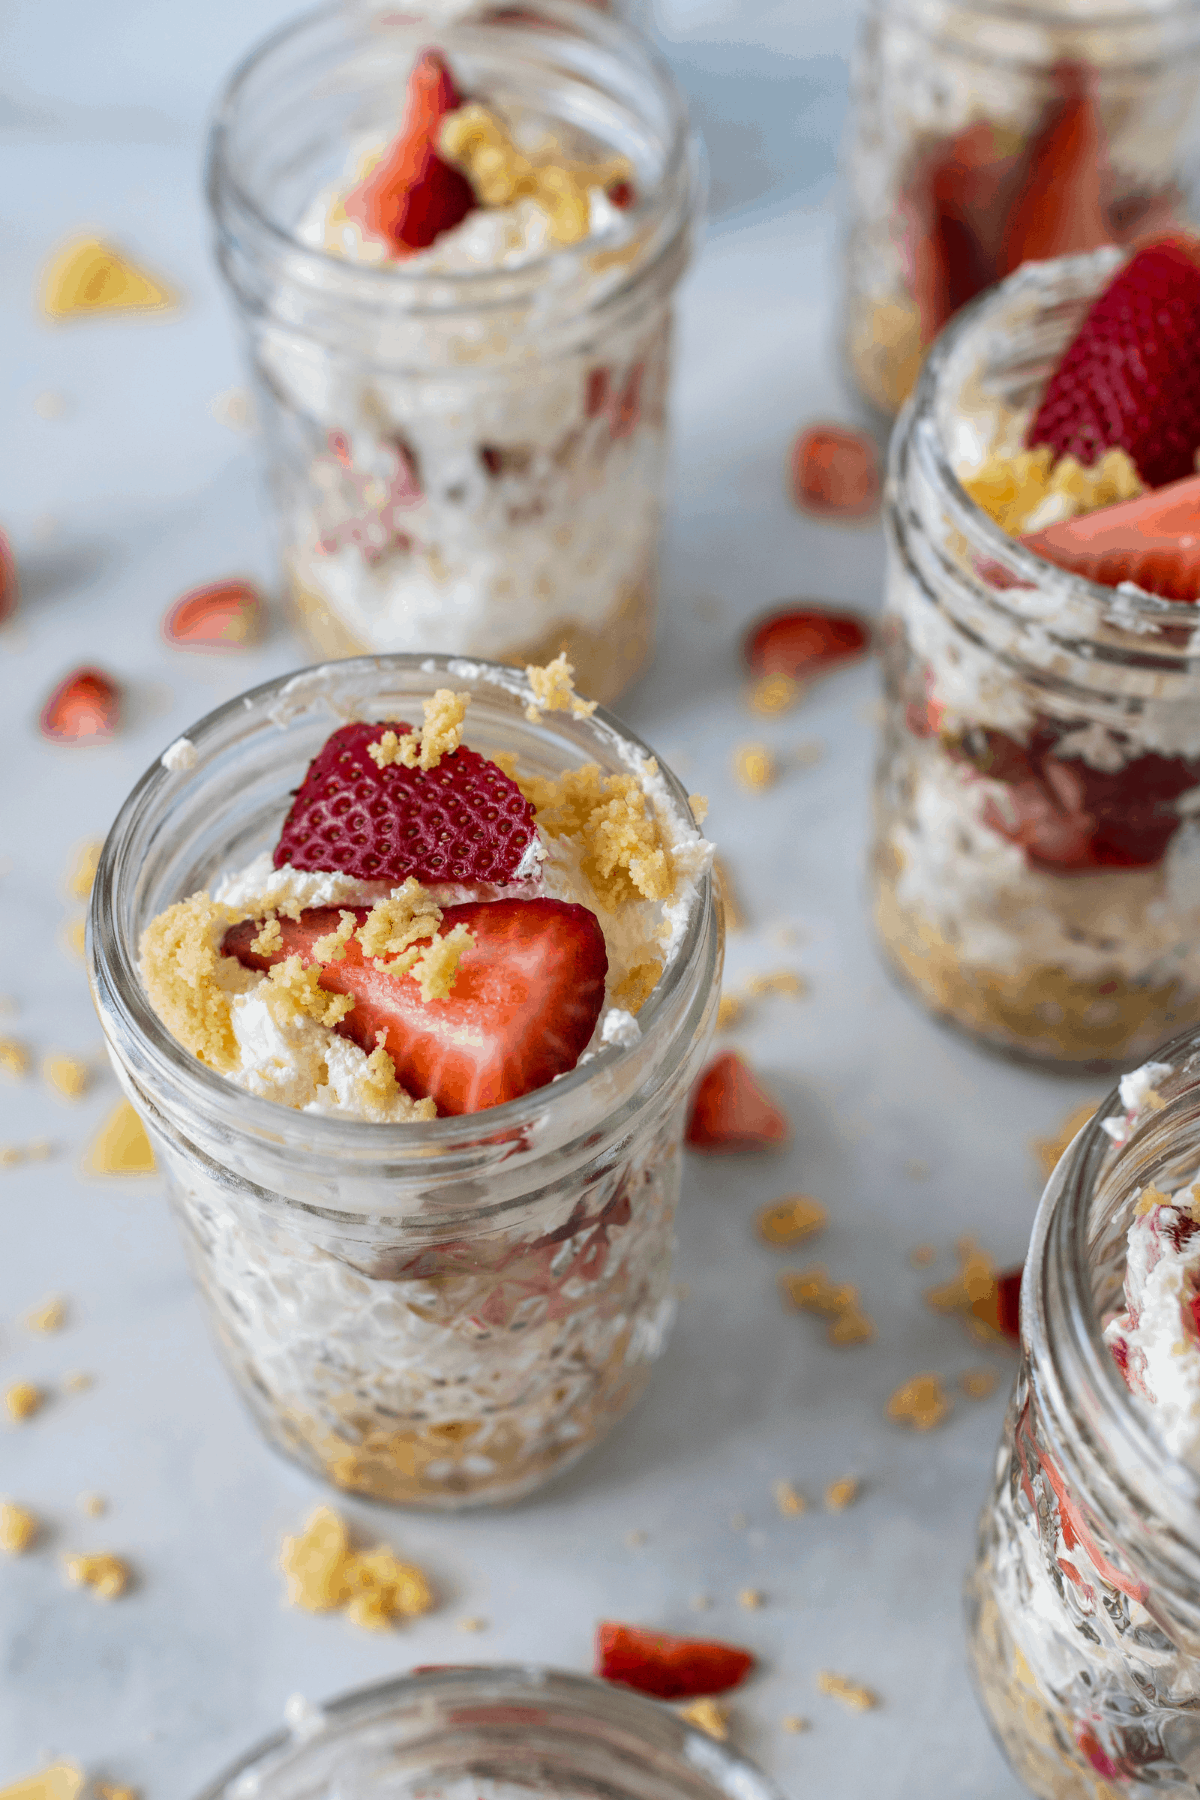 jars of layered strawberry cheesecake and vanilla crumb topping with strawberries on top.